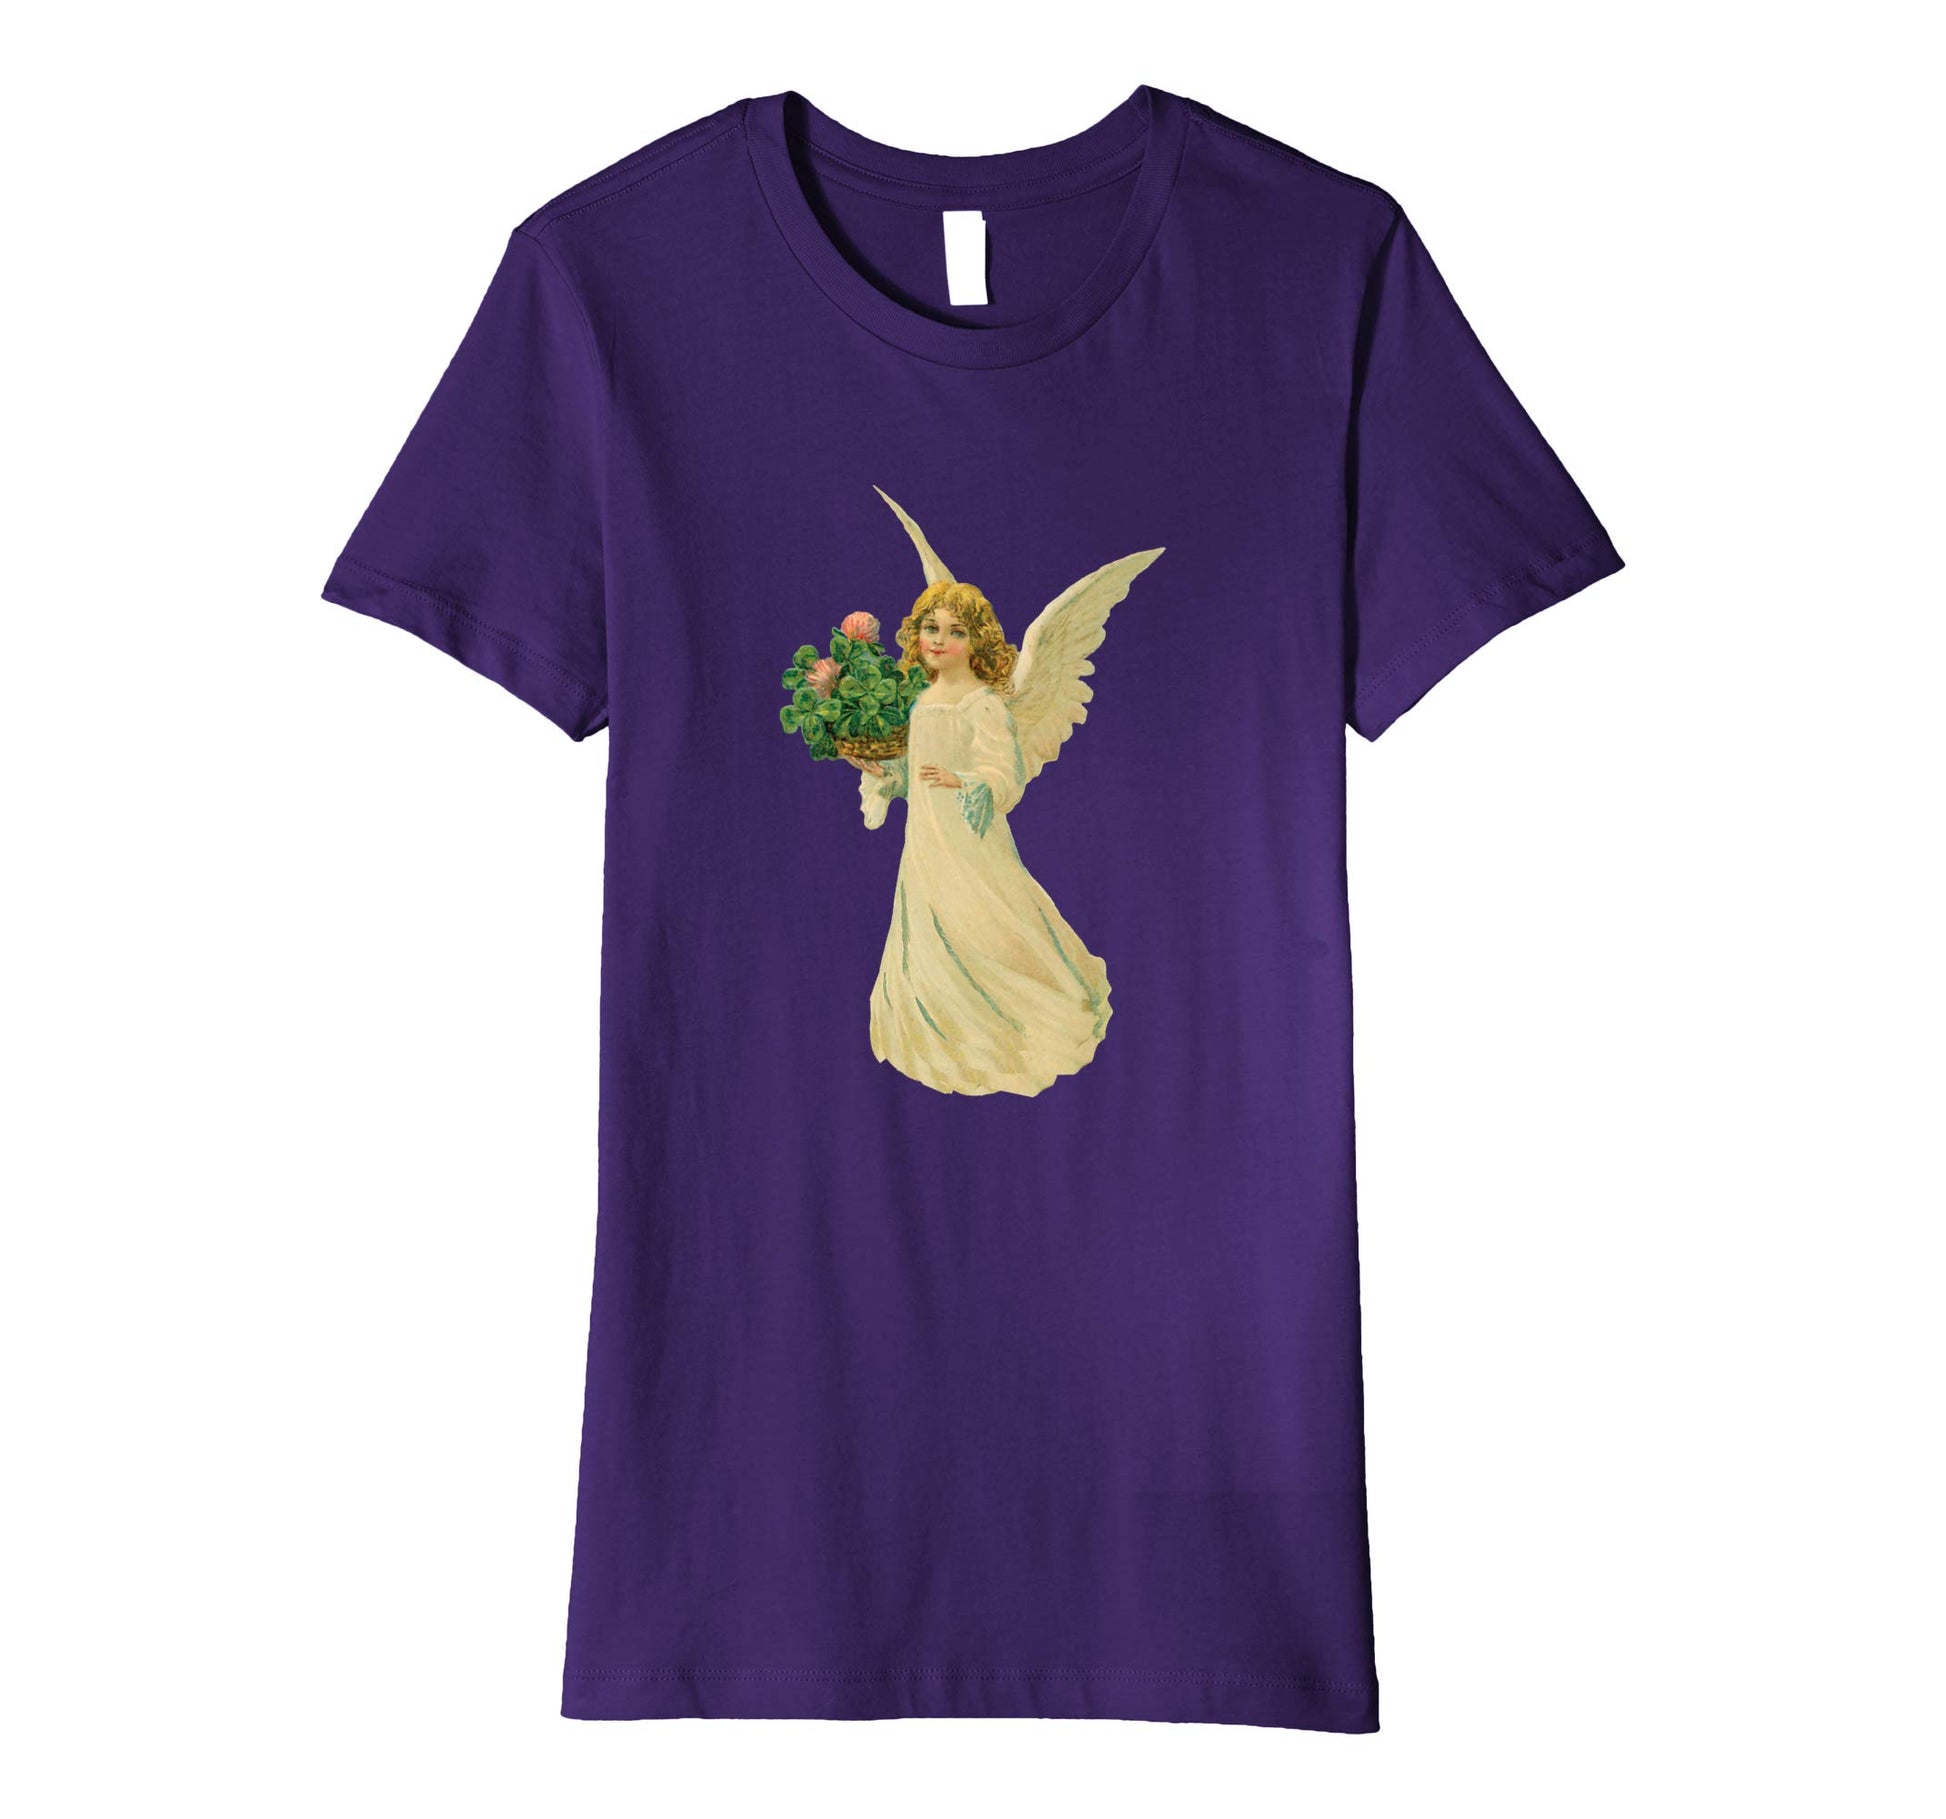 Womens Cotton Tee T-shirt Gift for Mom with Angel and Clover Art Purple